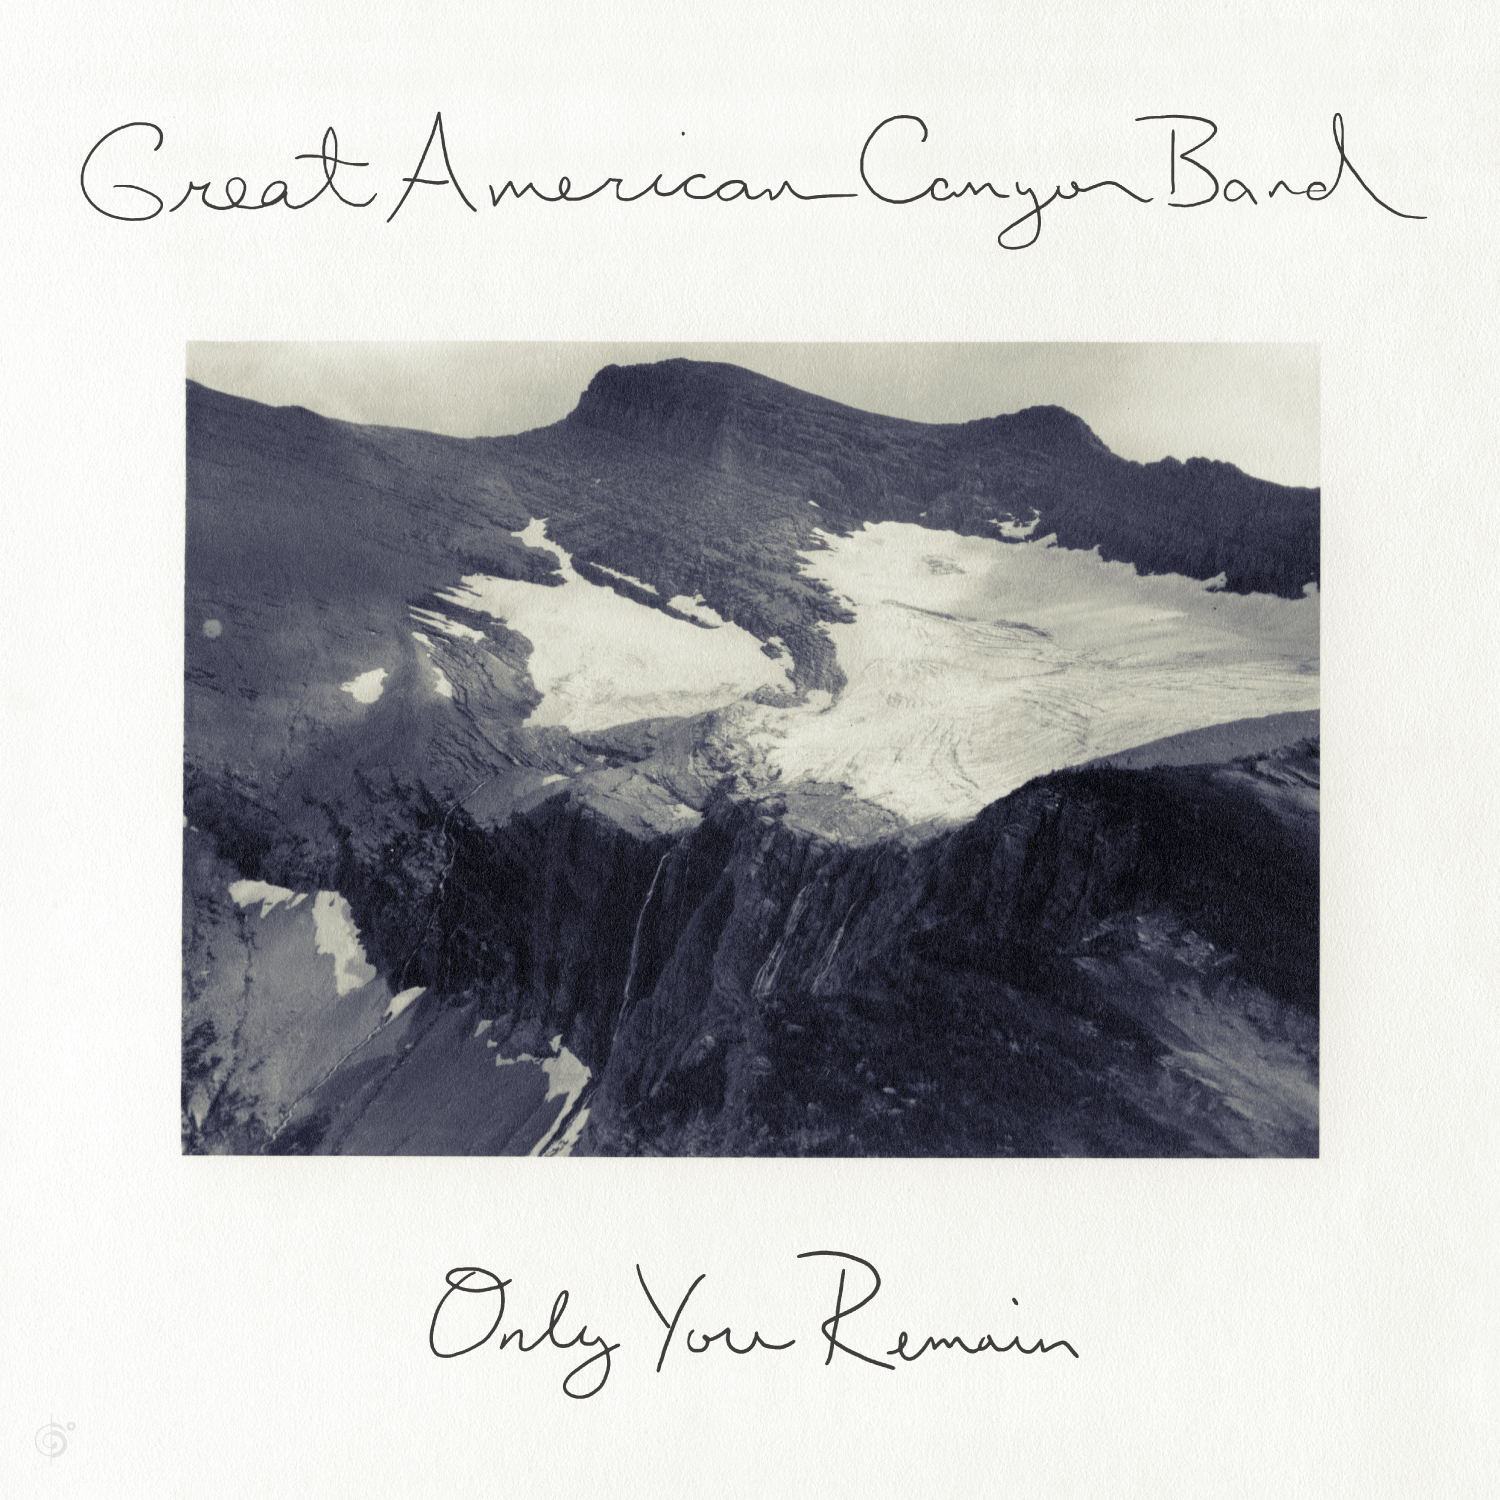 Great American Canyon Band’s ‘Crash’ featured on NPR Music